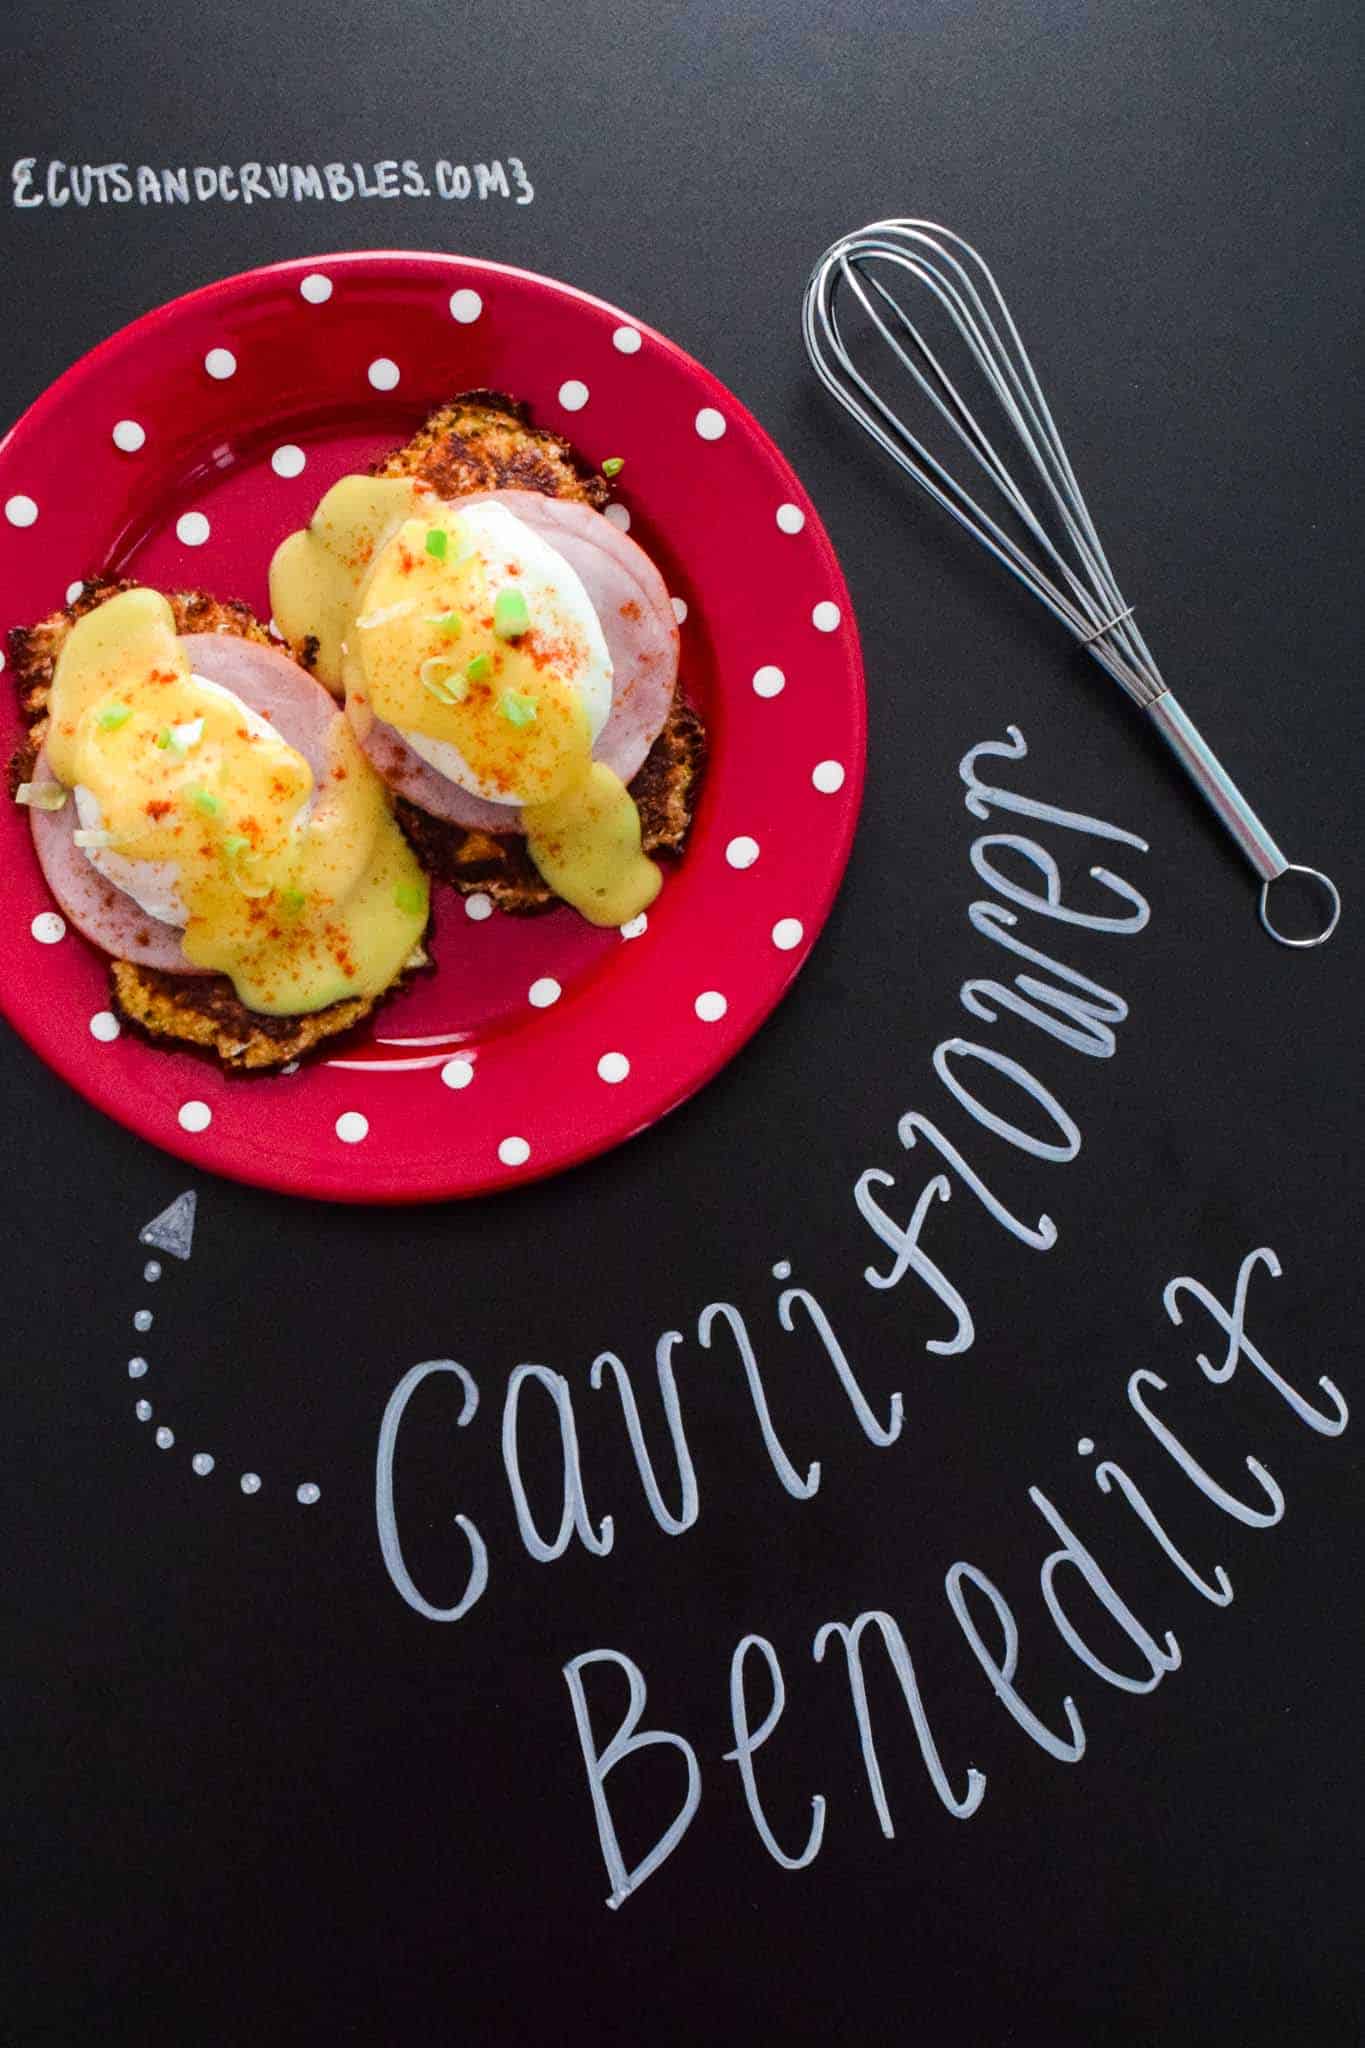 cauliflower benedict on red plate with title written on chalkboard